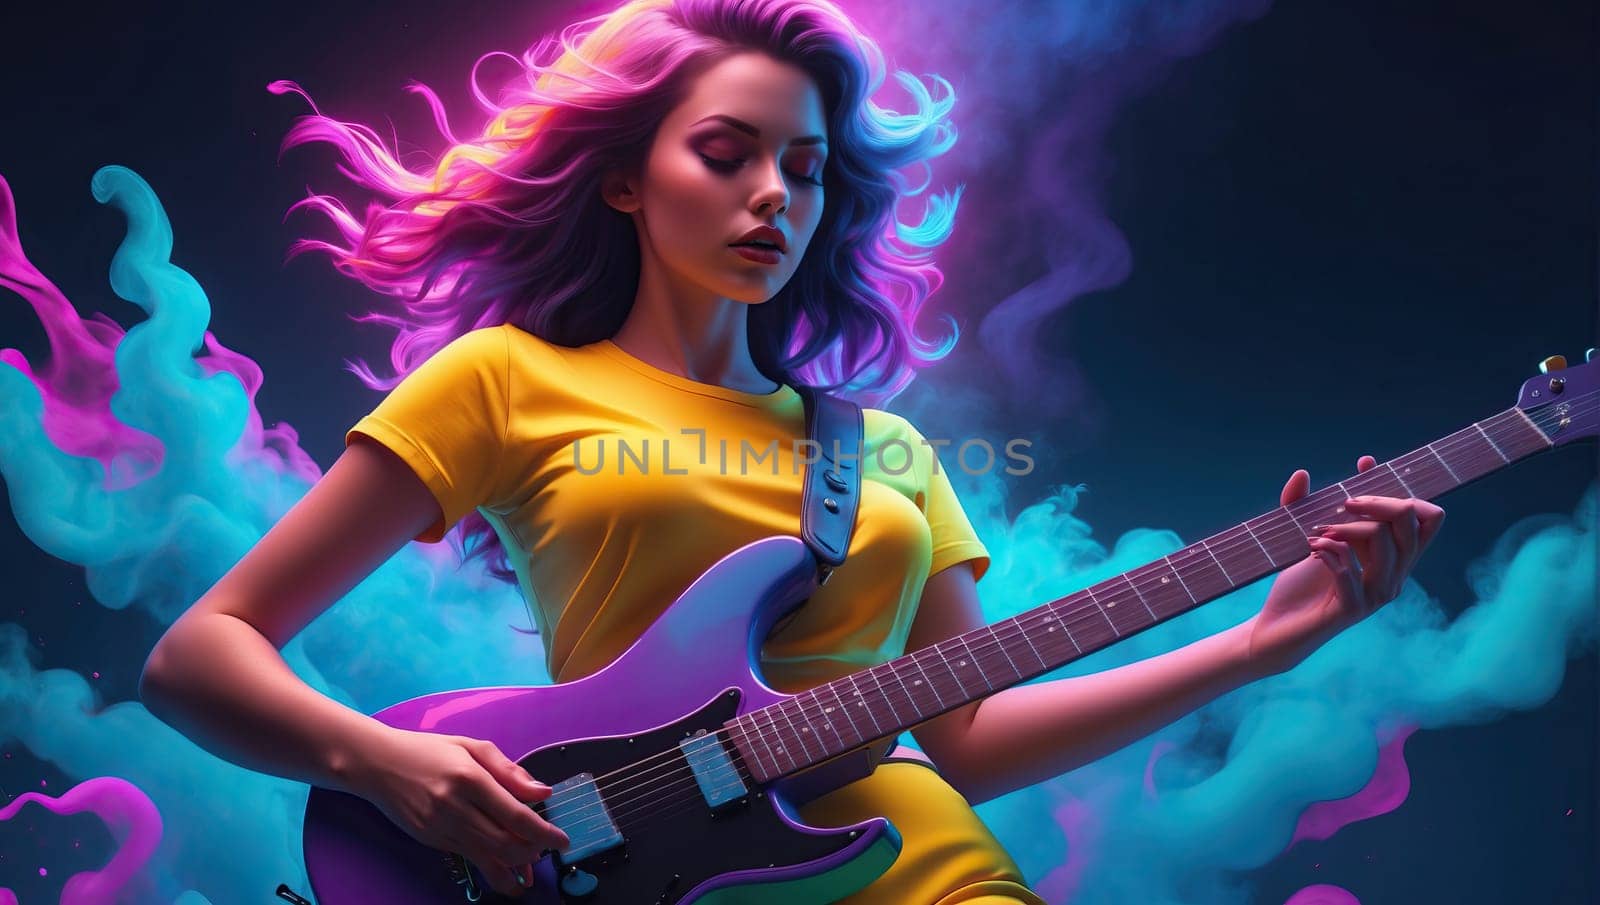 Girl with a guitar in neon light by applesstock